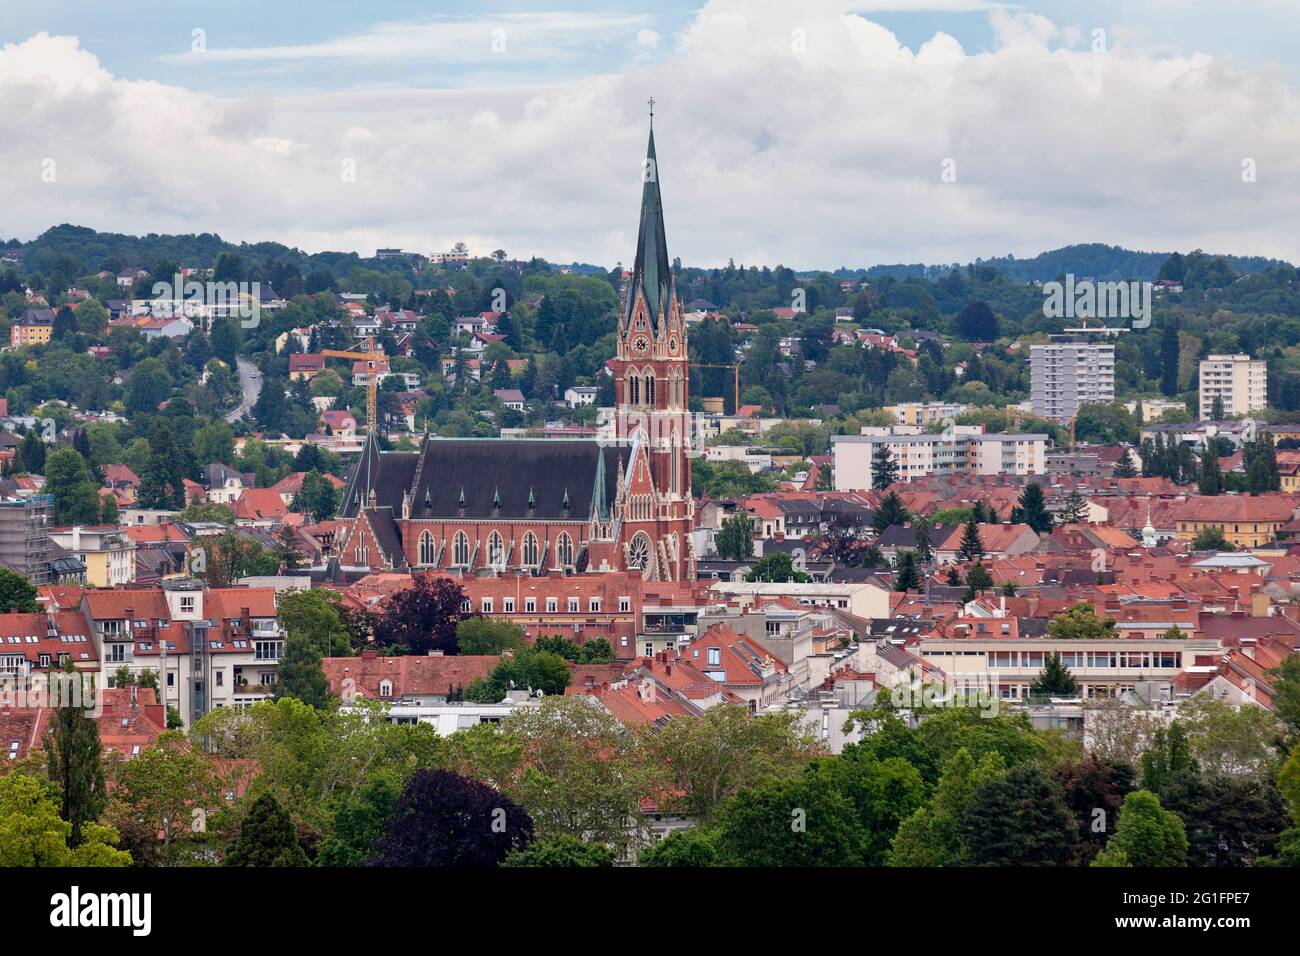 The Herz-Jesu-Kirche (English: Church of the Sacred Heart of Jesus) is the largest church in Graz, Austria. It was designed down to the last detail by Stock Photo